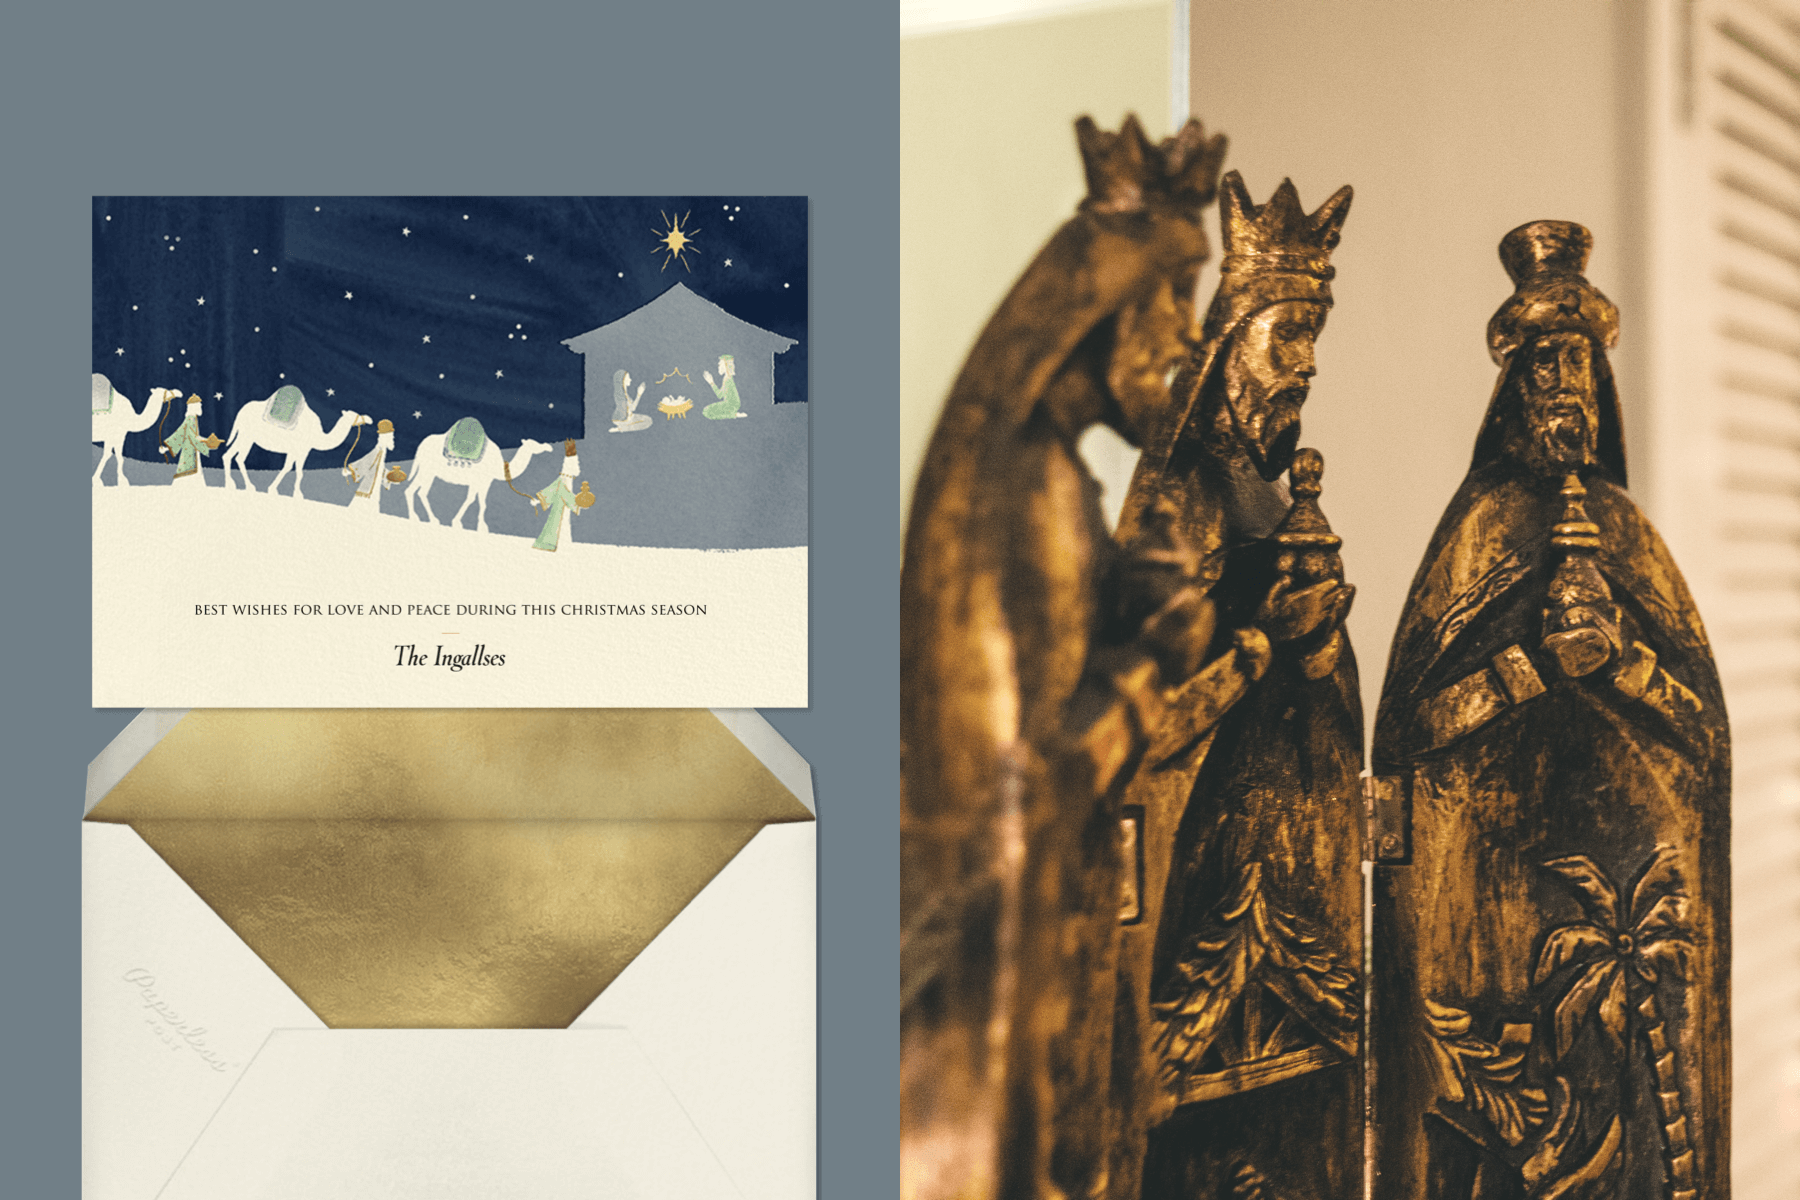 A card shows an illustration of three men leading camels to the nativity scene at night. Right: Bronze sculptures of the Three Wise Men. 